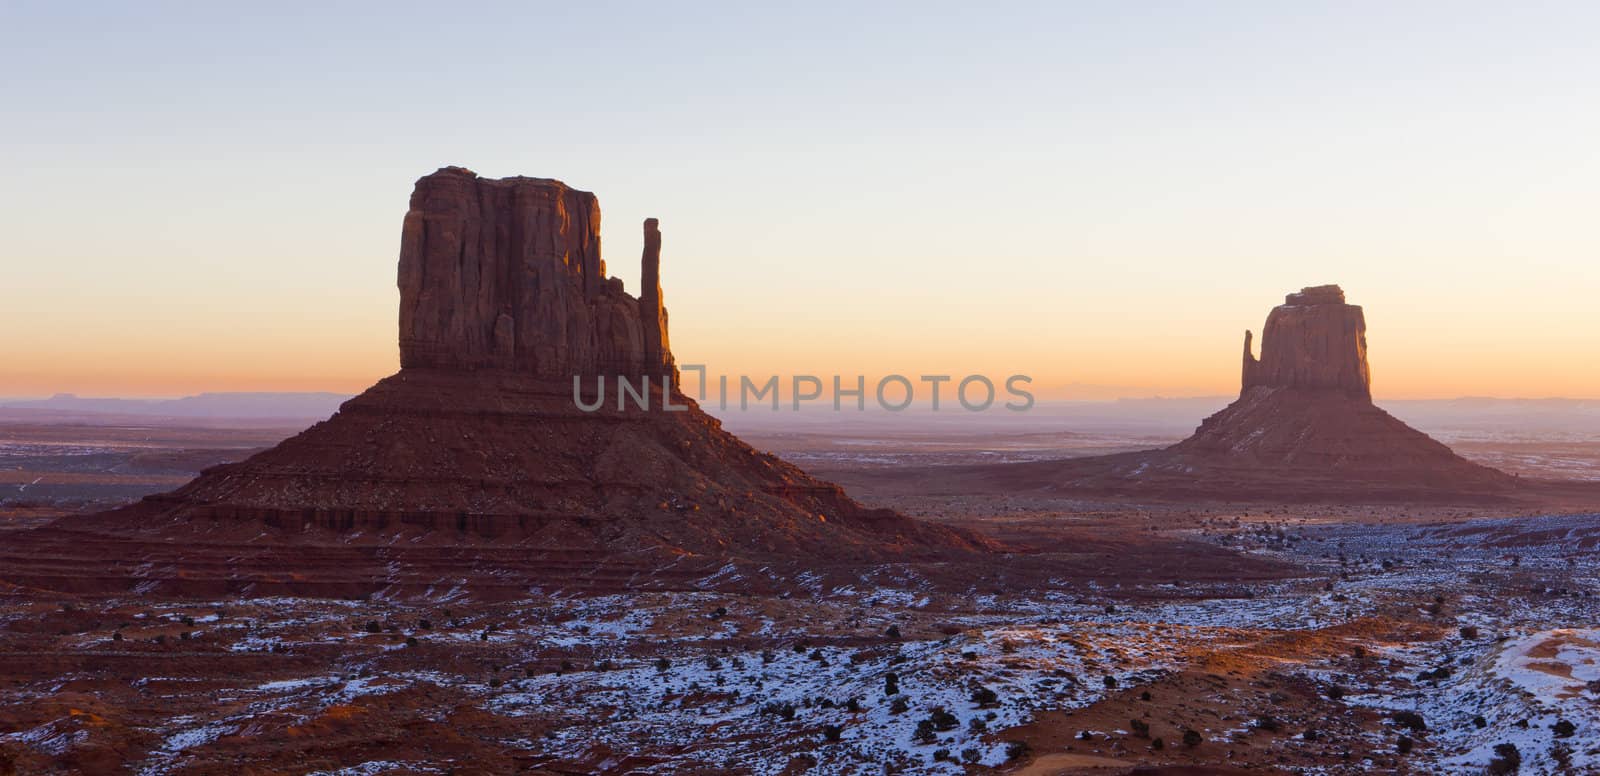 The Mittens, Monument Valley National Park, Utah-Arizona, USA by phbcz